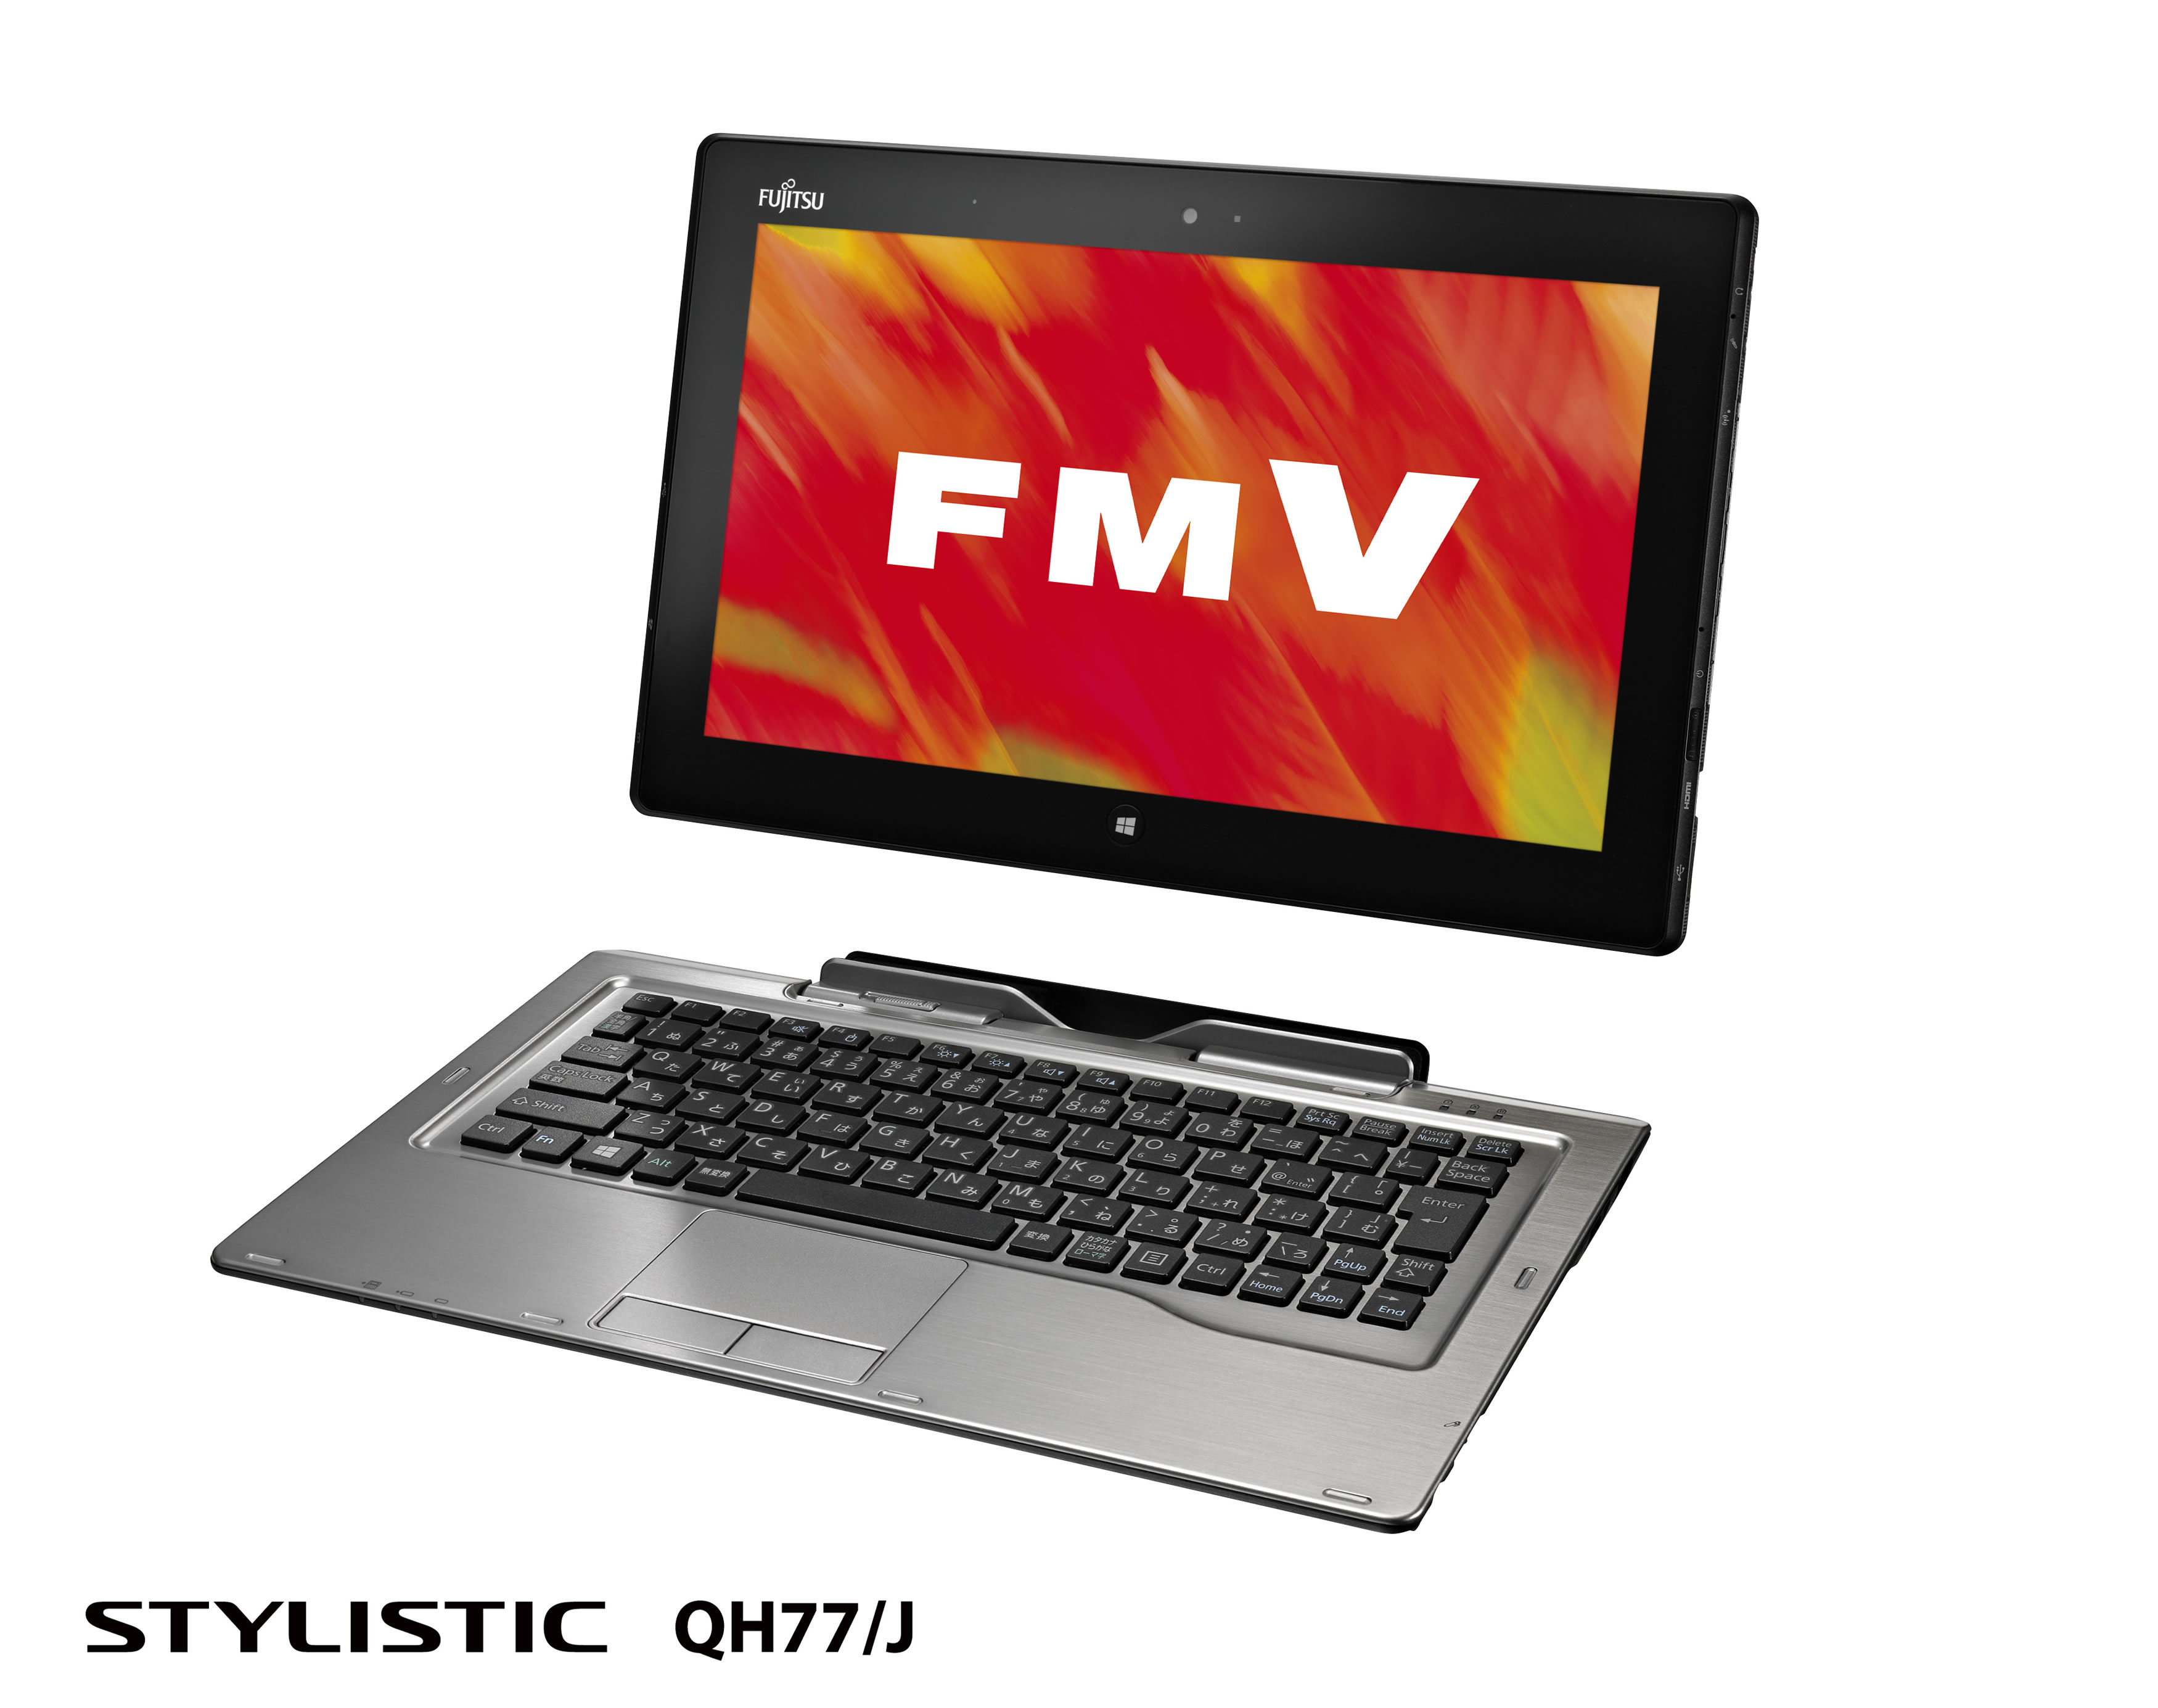 Fujitsu Announces New Lineup of Windows 8 Consumer PCs and Tablet